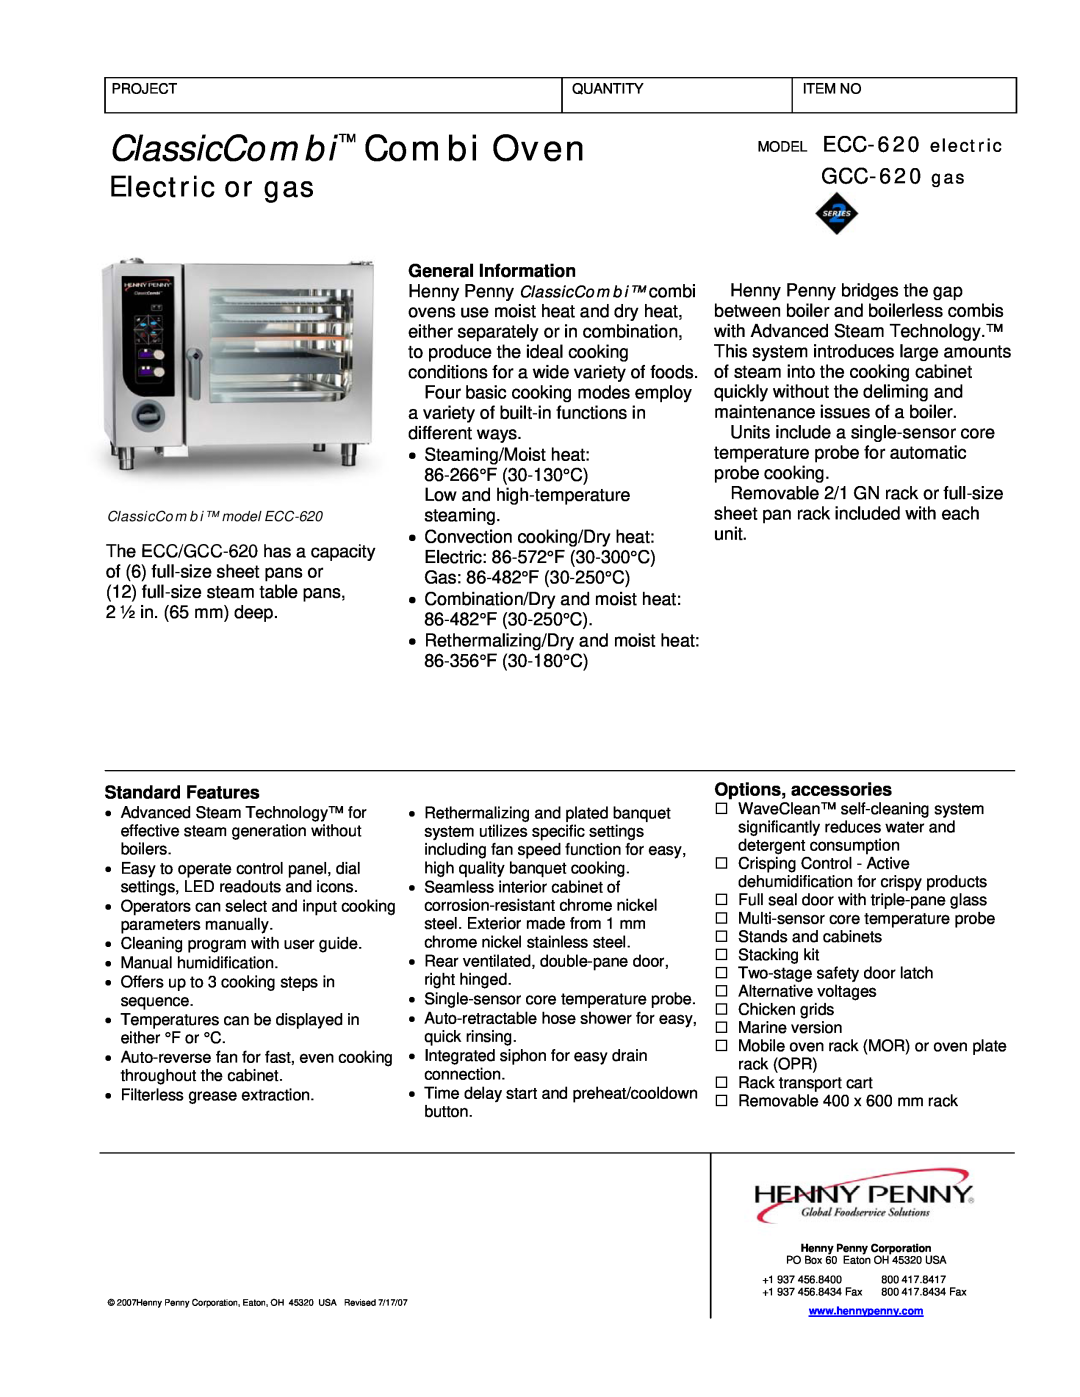 Henny Penny manual MODEL ECC-620 electric, GCC-620 gas, ClassicCombi Combi Oven, Electric or gas, General Information 